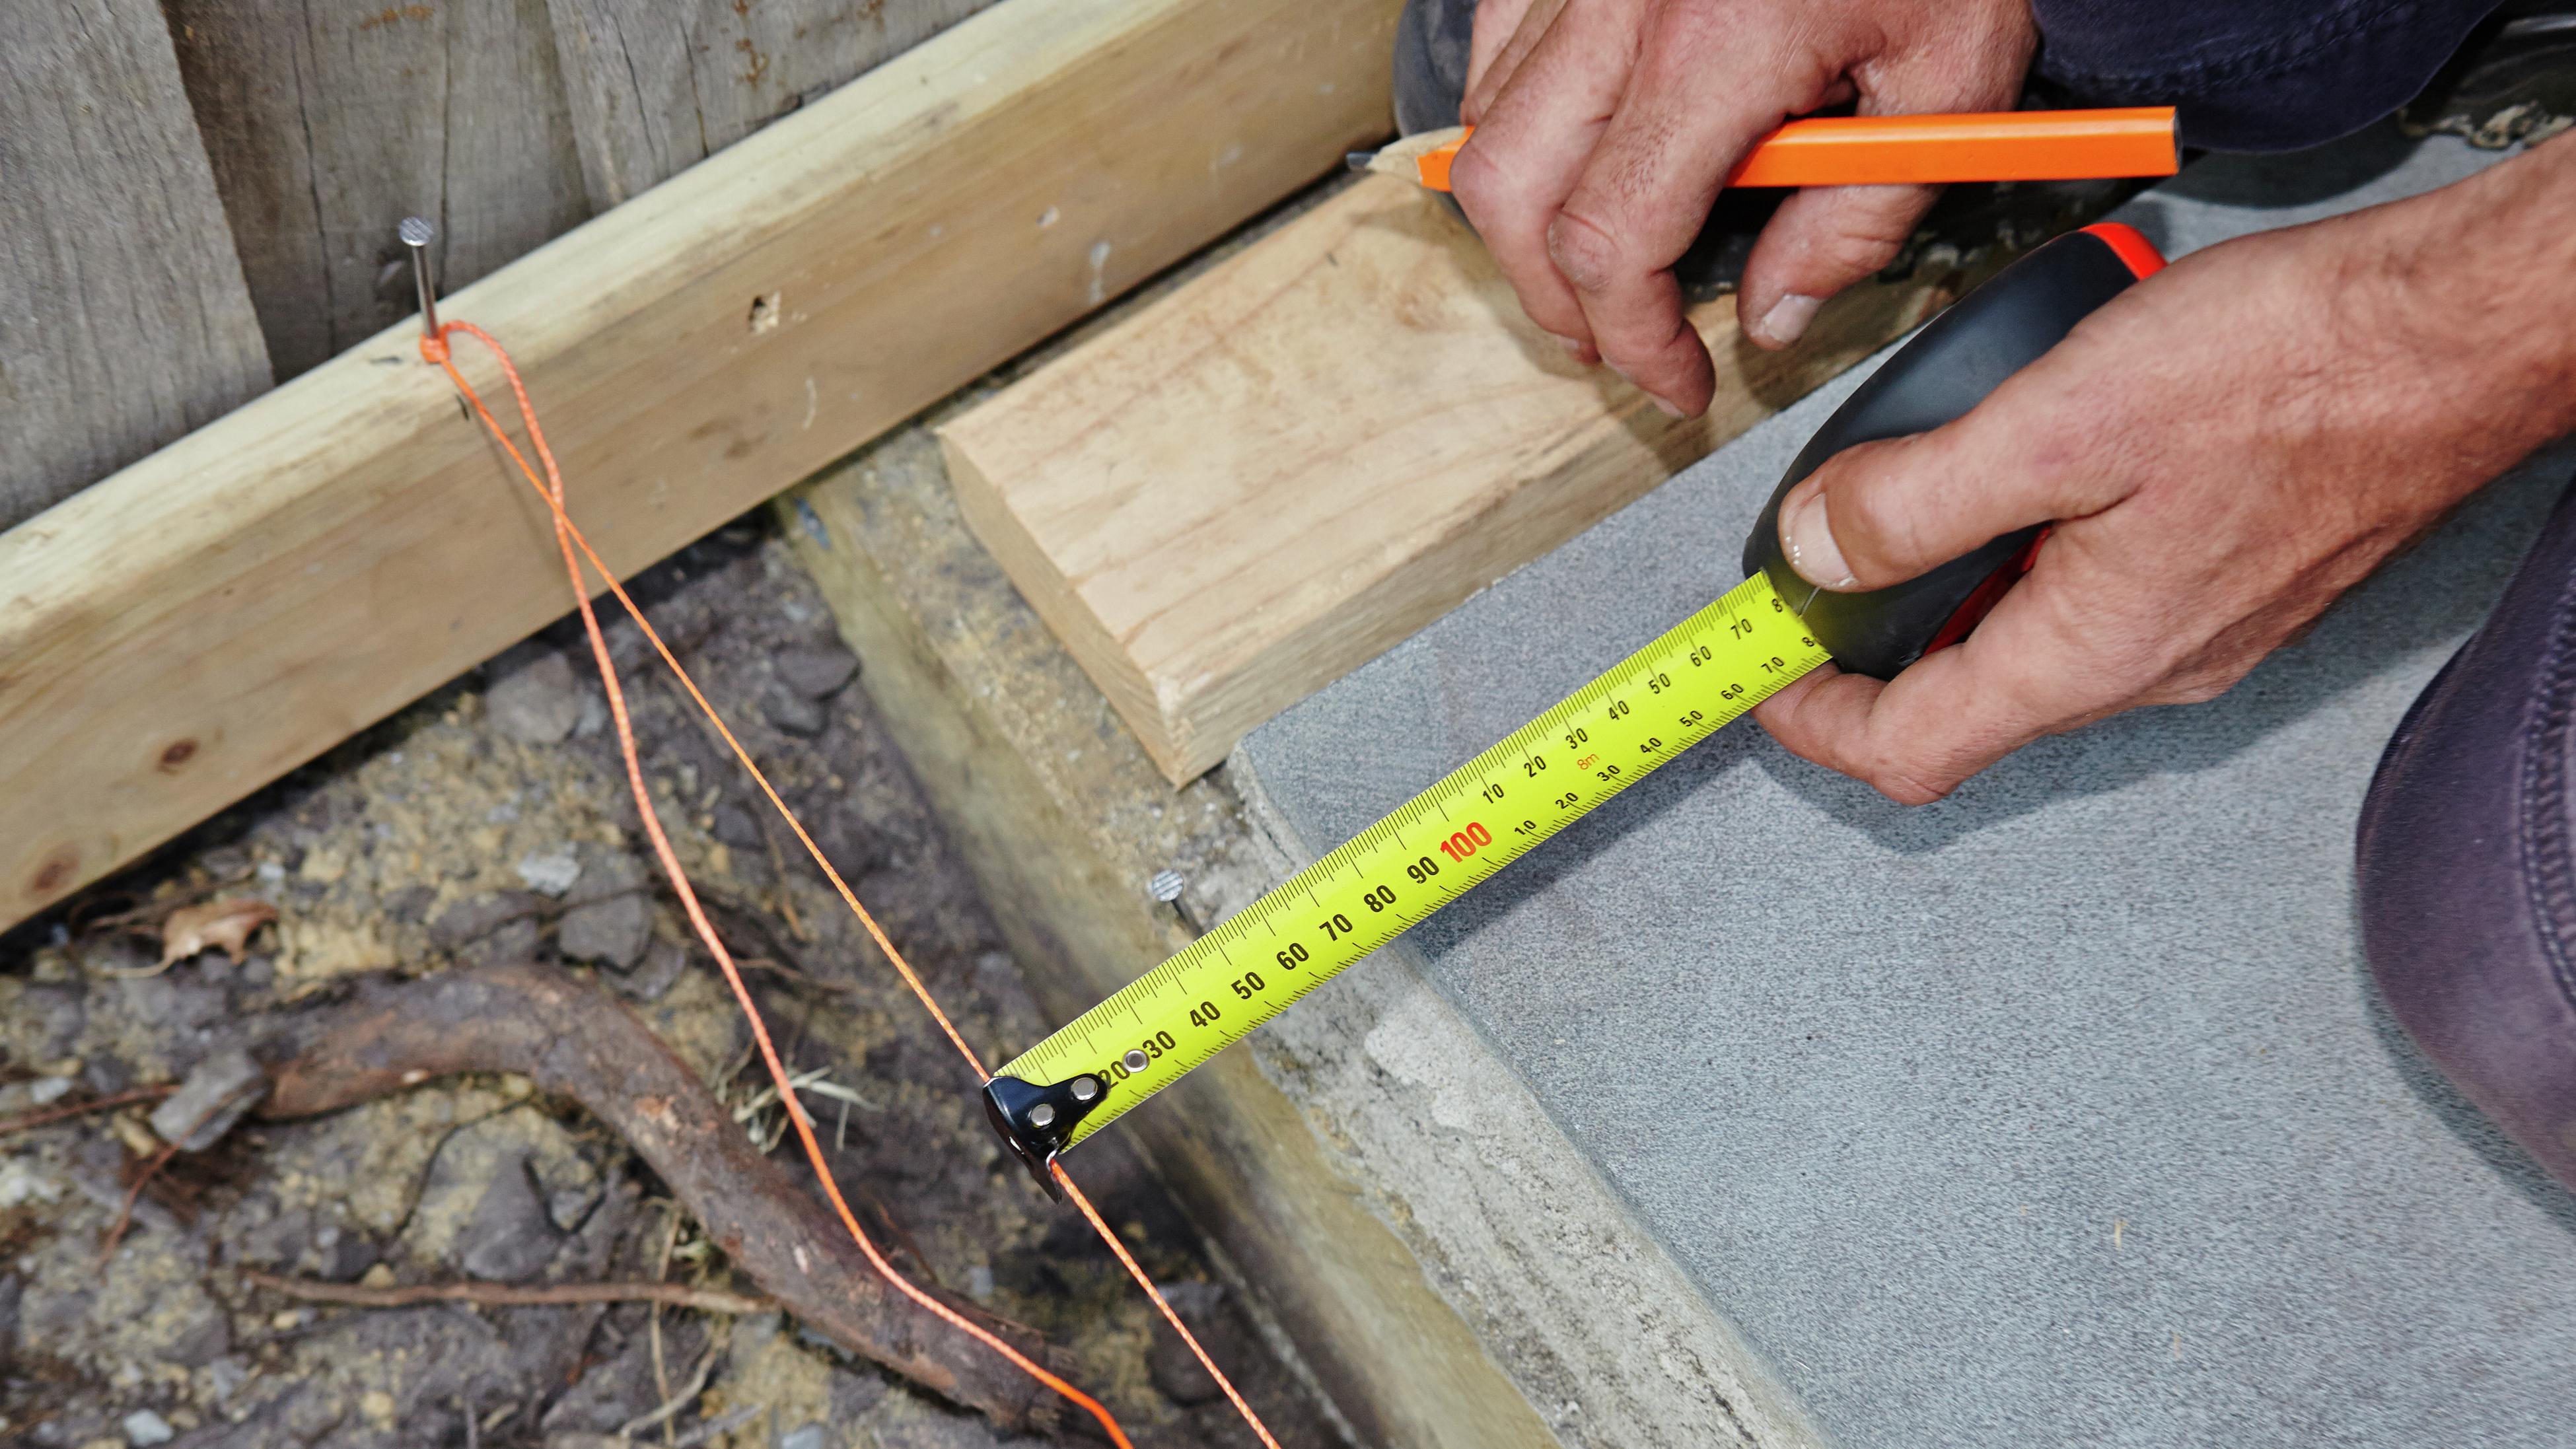 How To Set Out String Lines For a Carport - Bunnings Australia